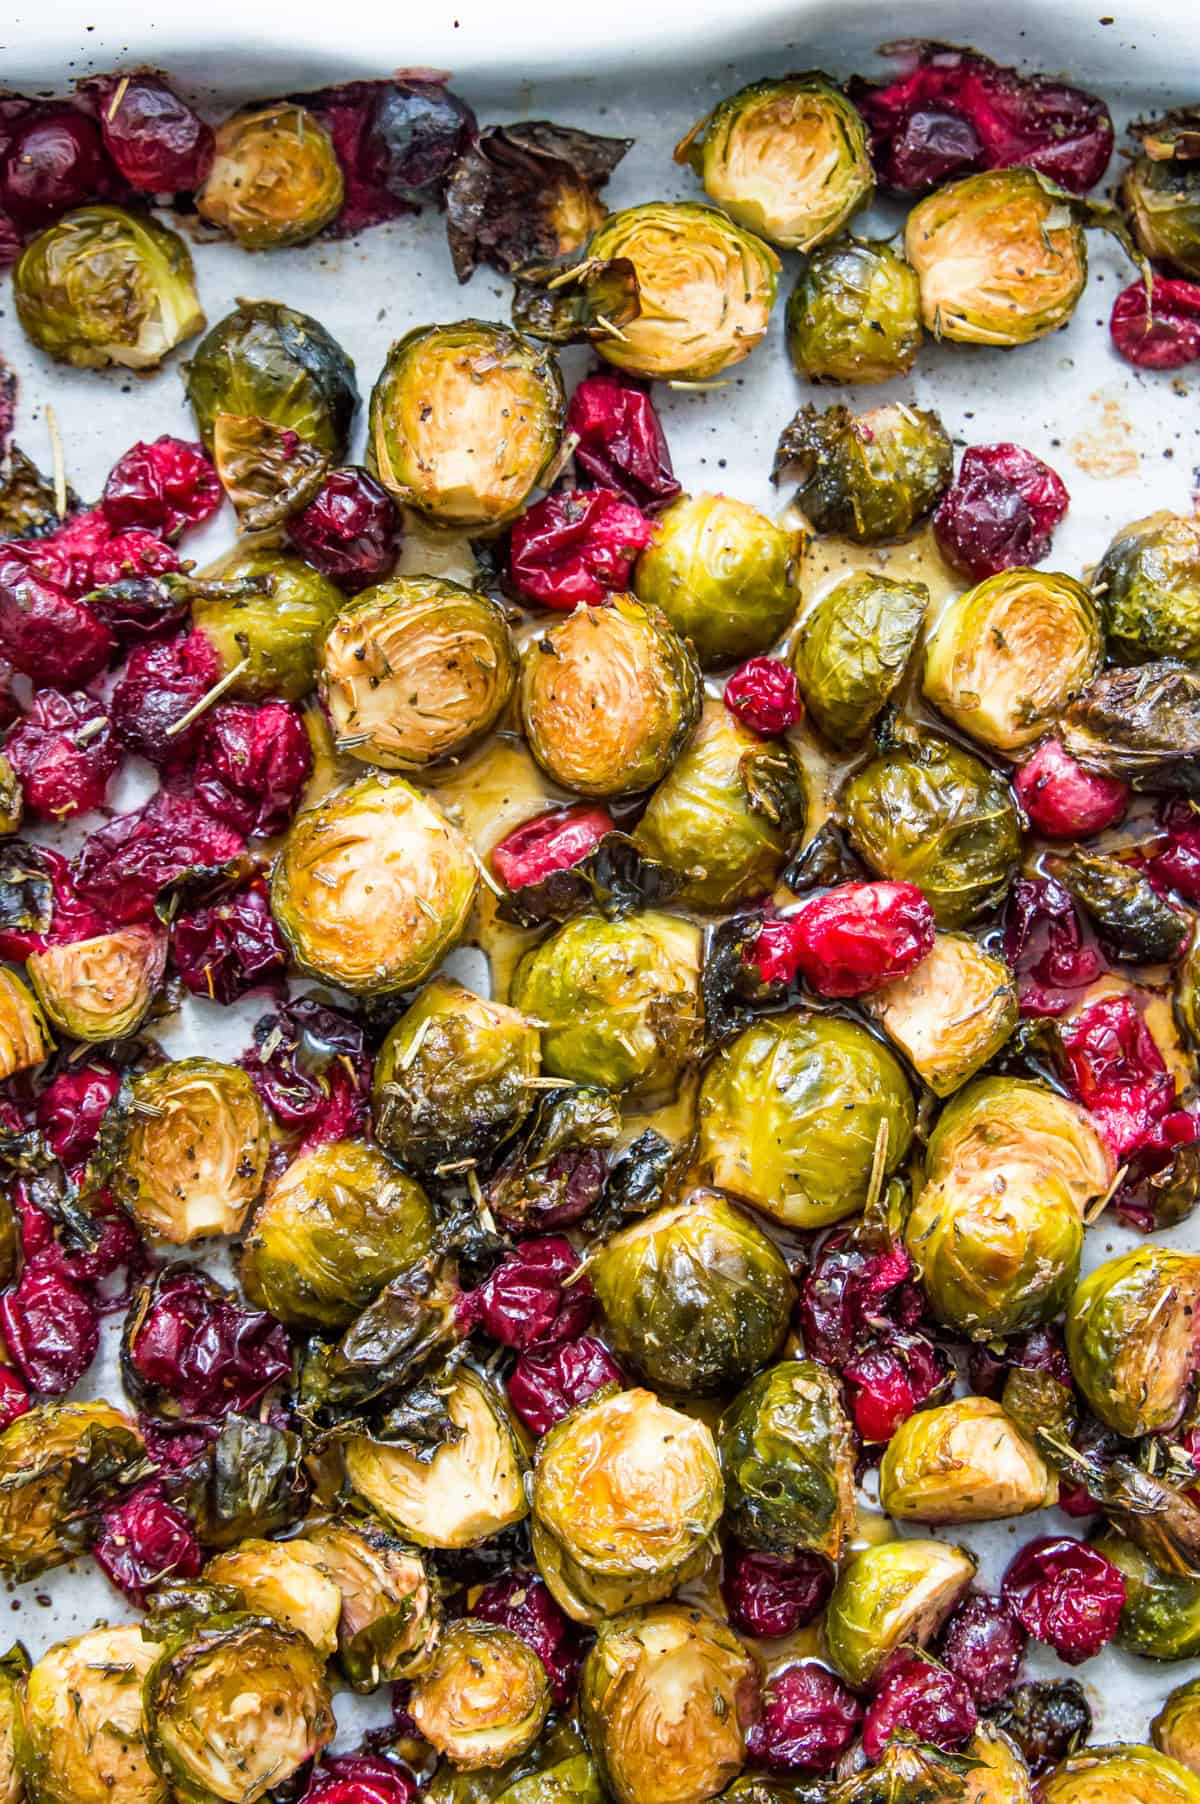 Roasted Brussels sprouts and cranberries coated in maple syrup.